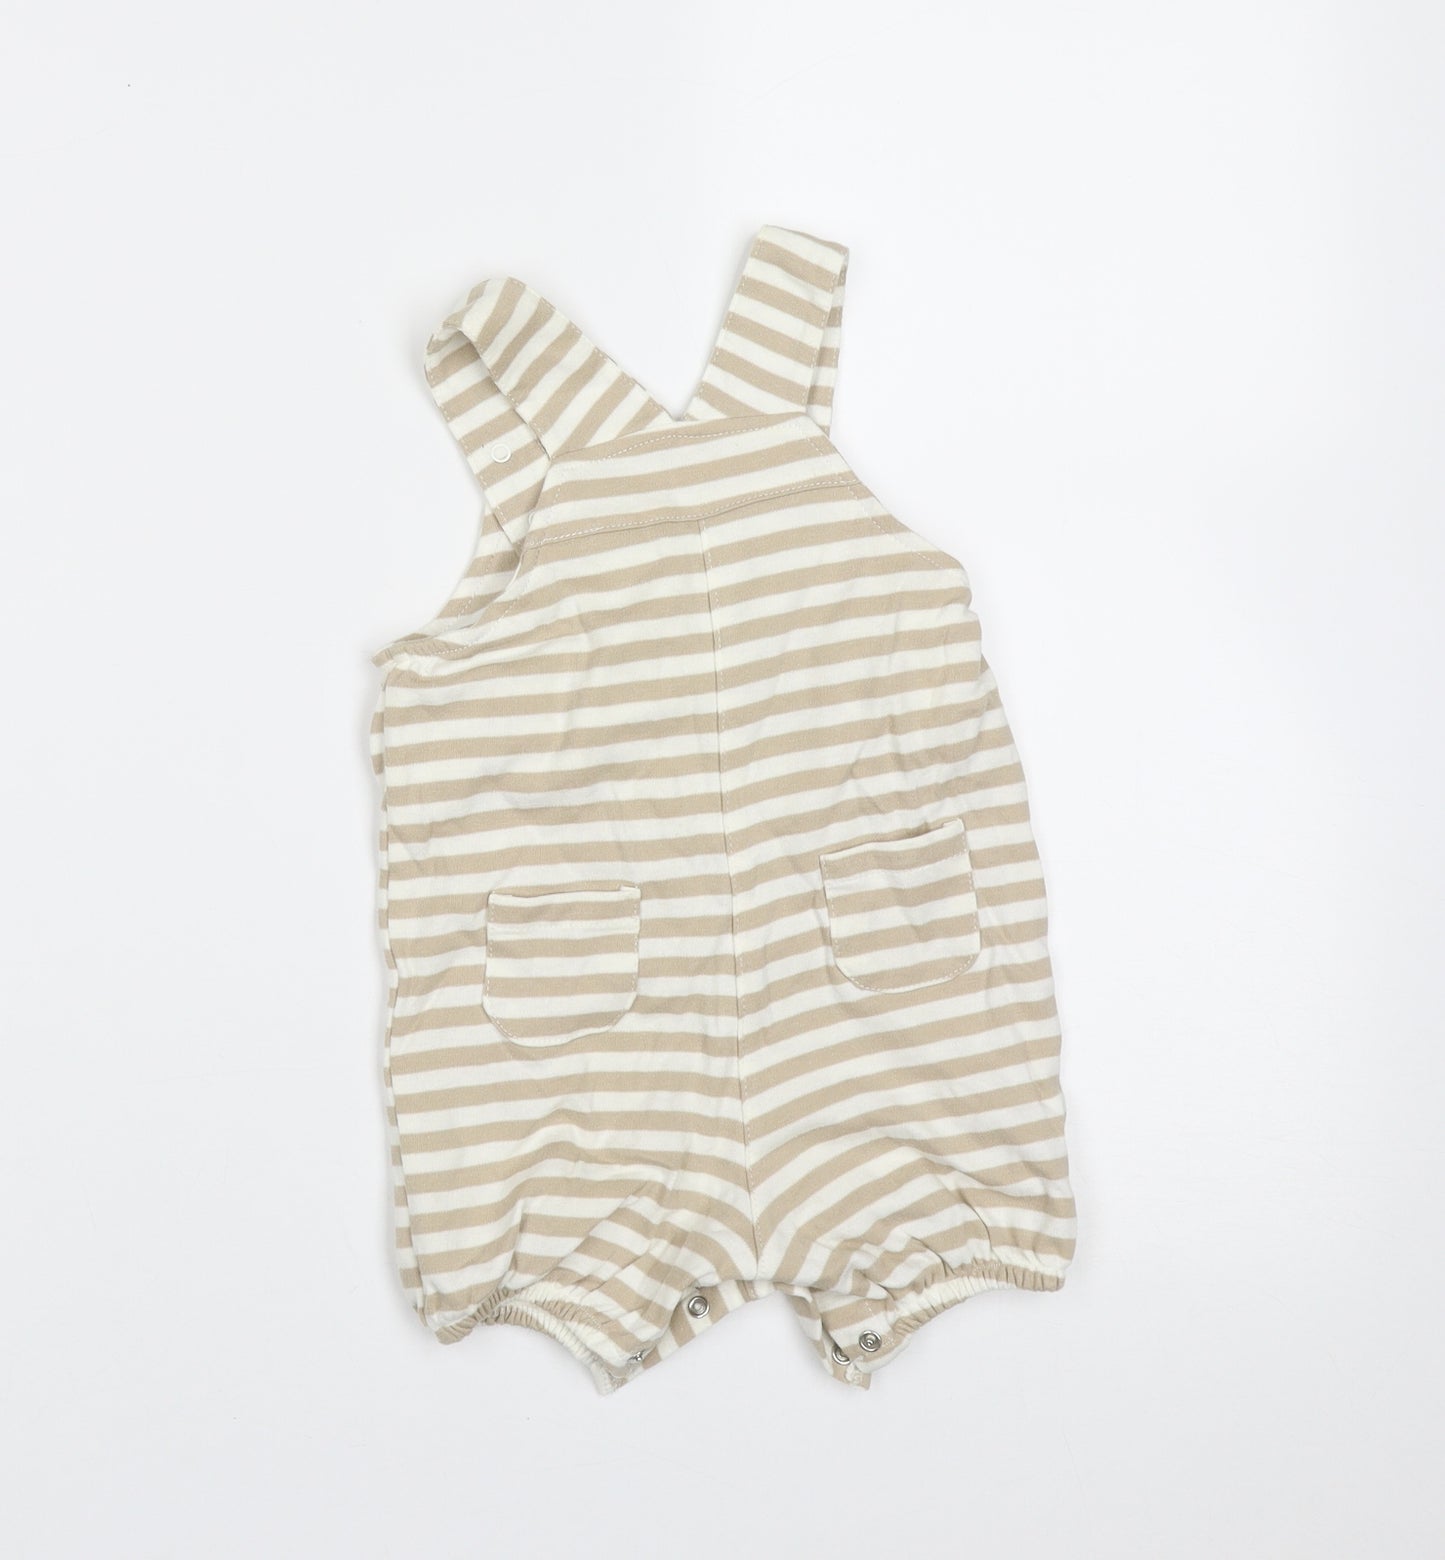 MINIMODE Baby Beige Striped Cotton Dungaree Outfit/Set Size 3-6 Months